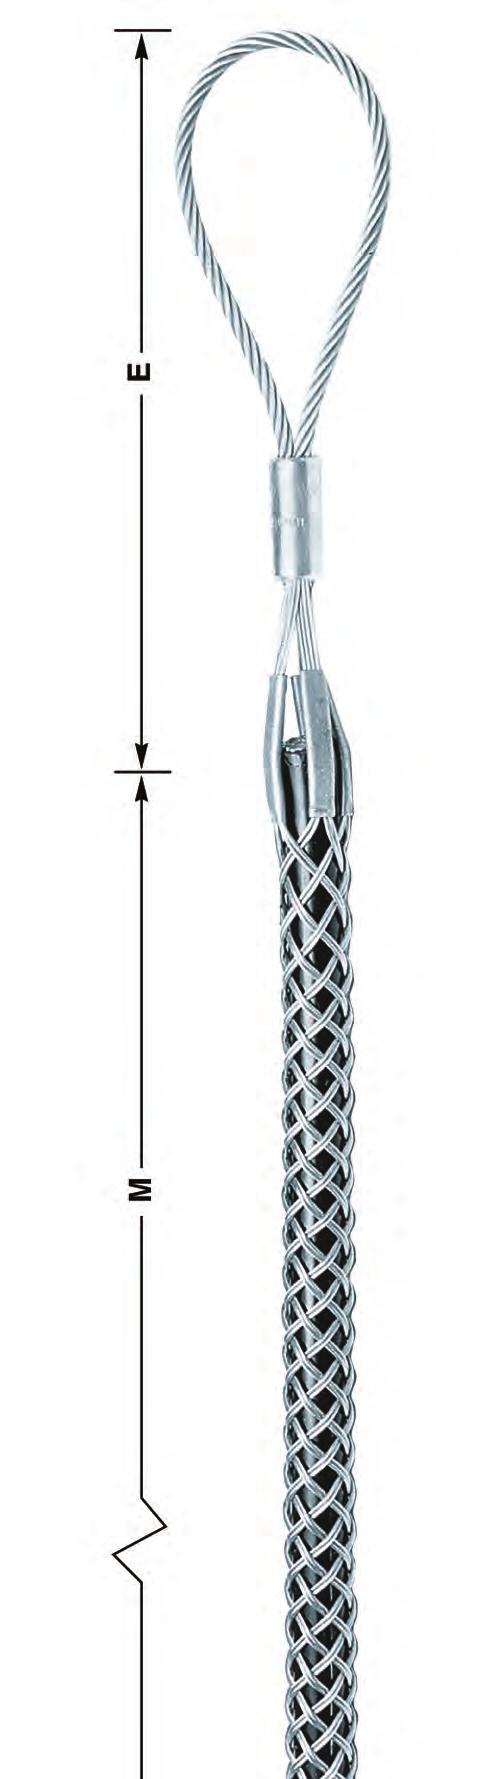 Kellems Wire anagement Products Underground T-Type Pulling Grips Flexible ye, Double Weave, Galvanized Steel T-Type Grips Kellems Flexible T-Type Pulling Grips are made of high strength galvanized